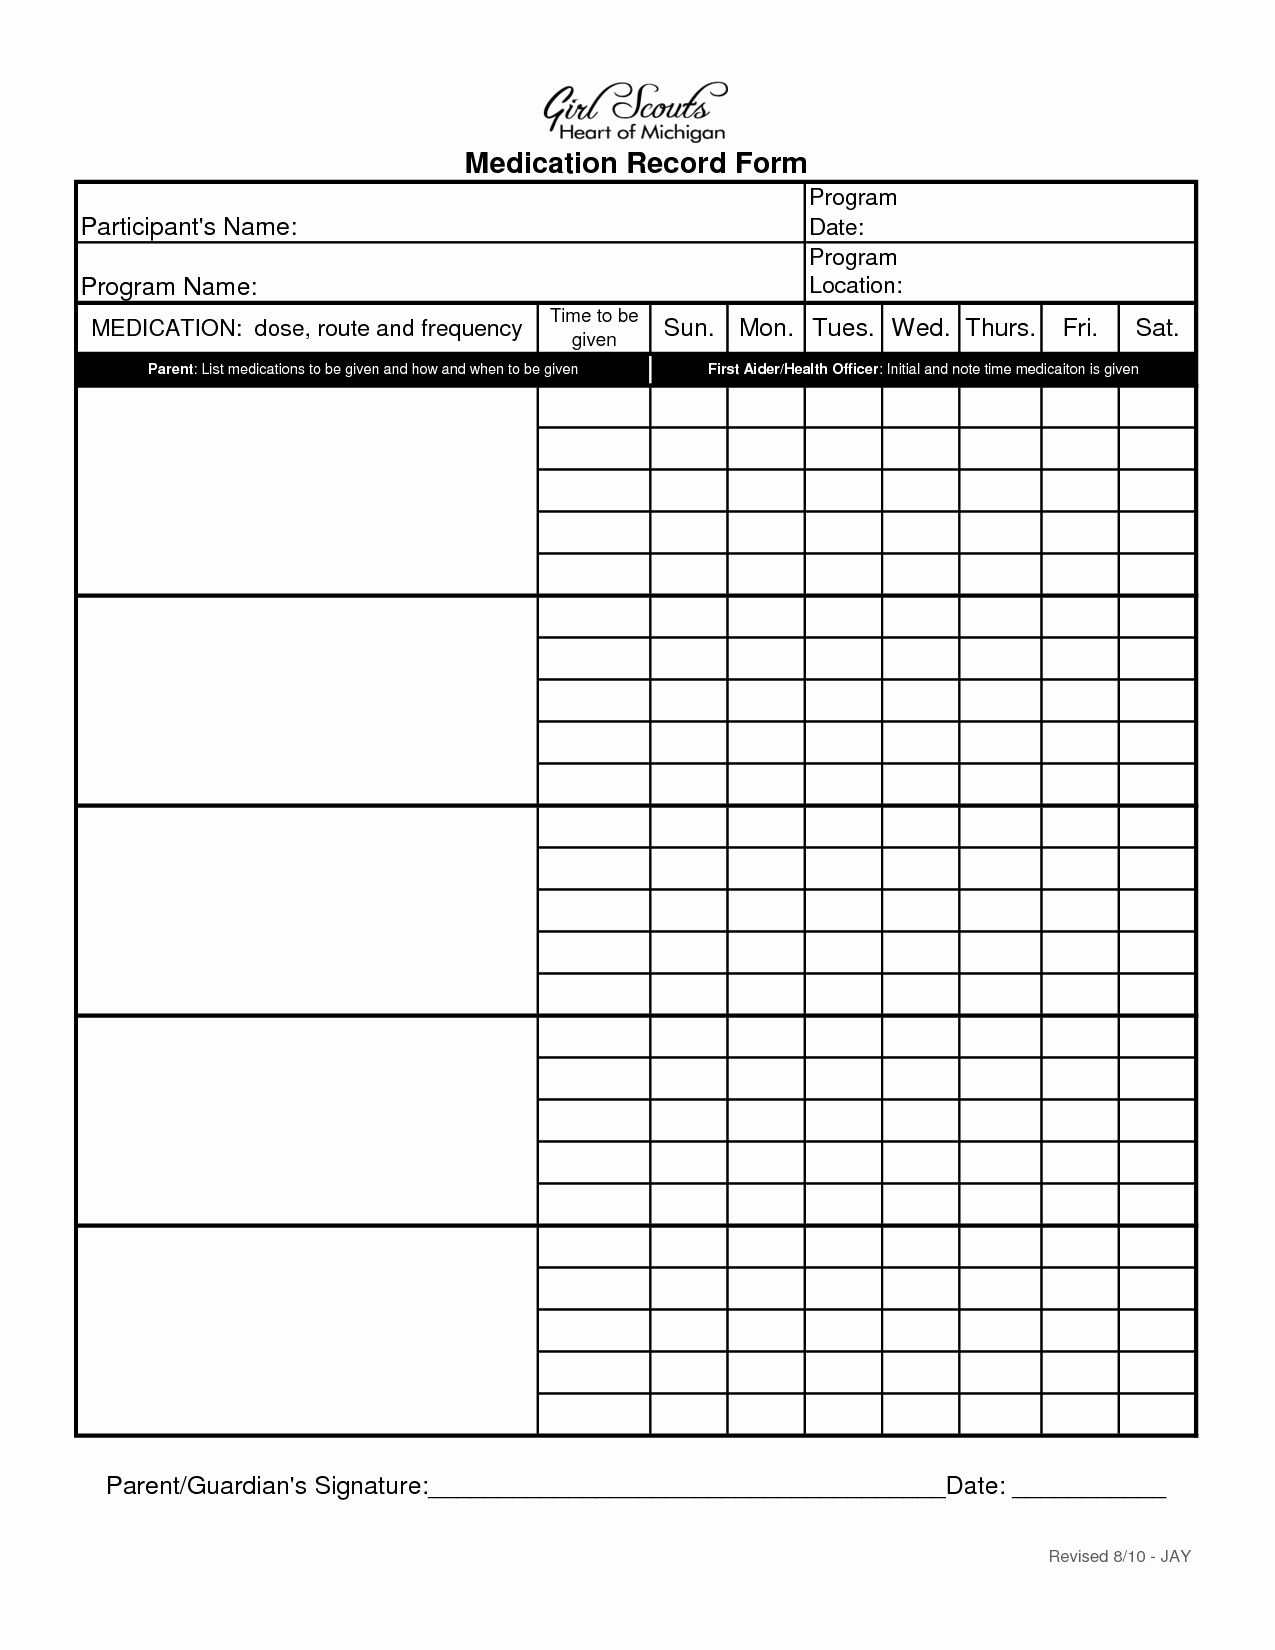 Medication Inventory Spreadsheet Free Blank Excel Invoice With Blank Medication List Templates